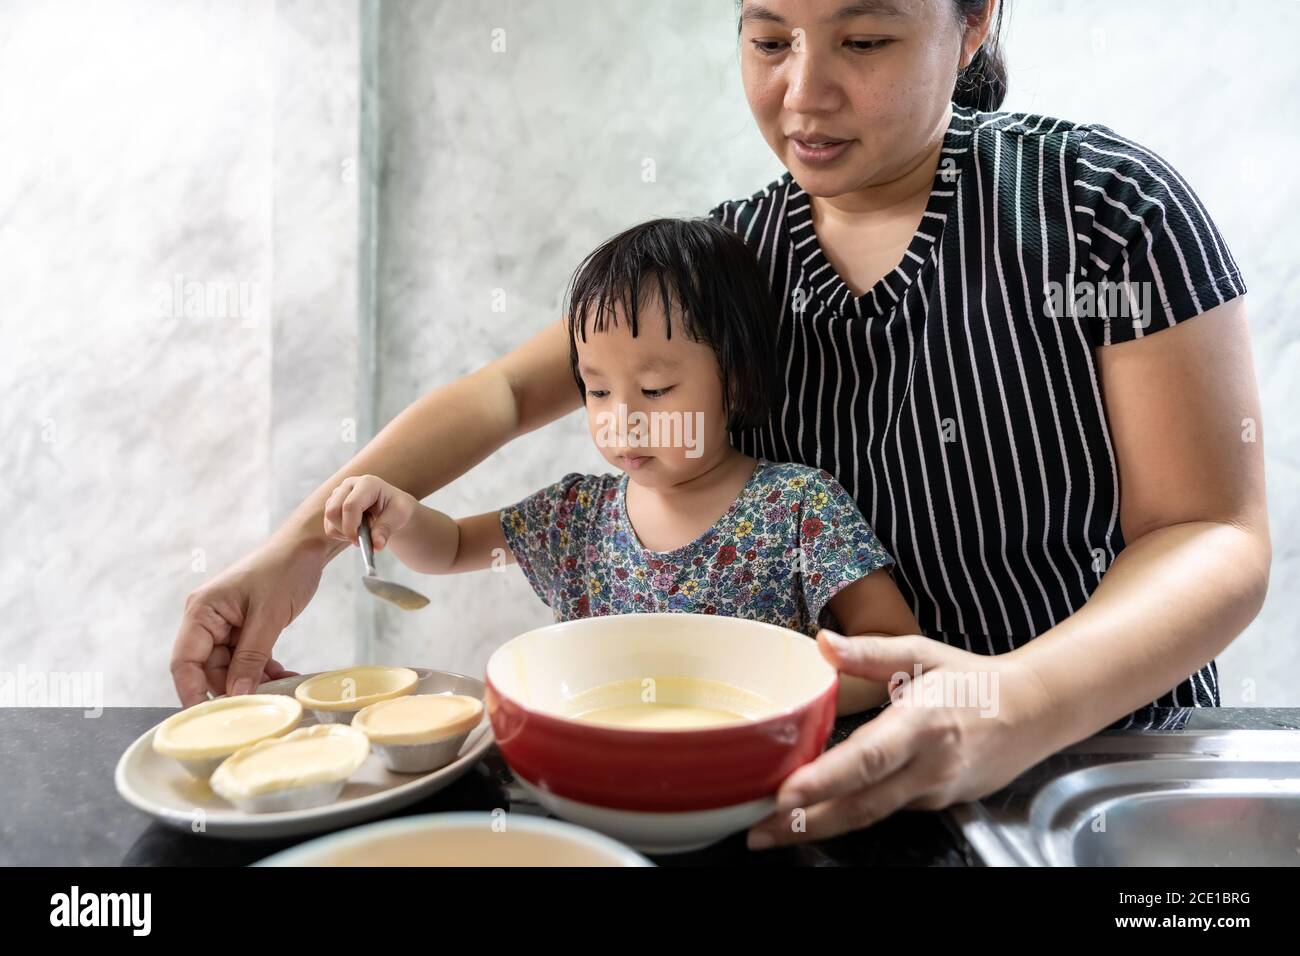 Asian girl cooking with mom Stock Photo